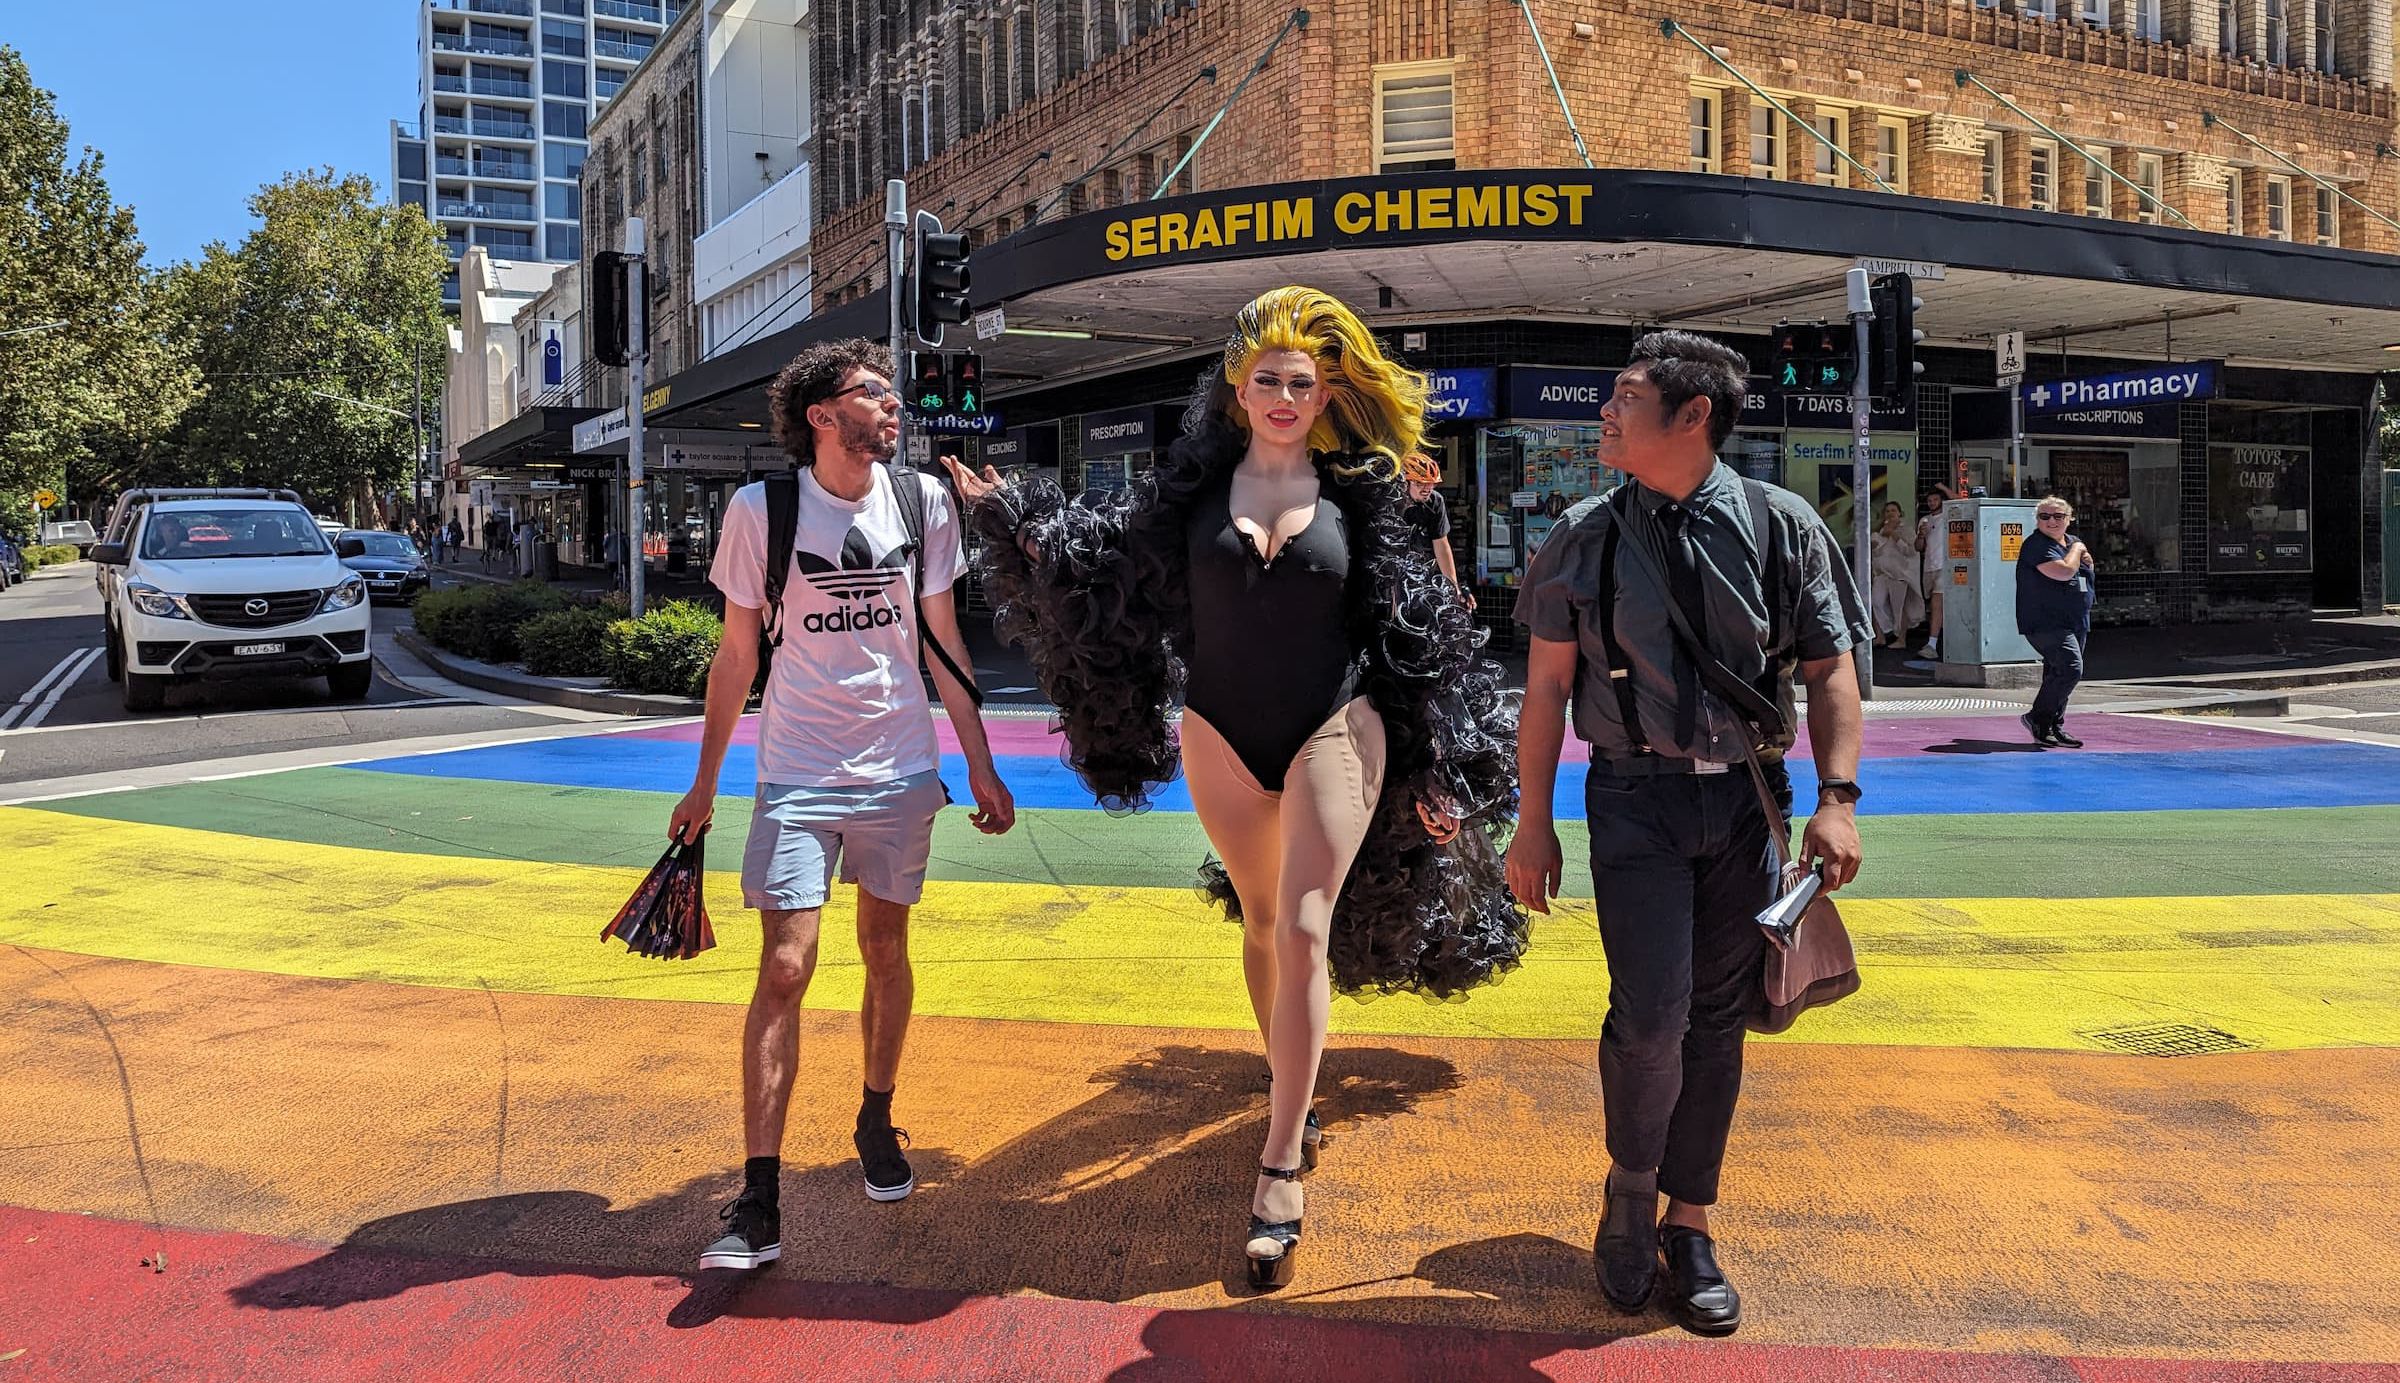 rainbow crossing with drag queen